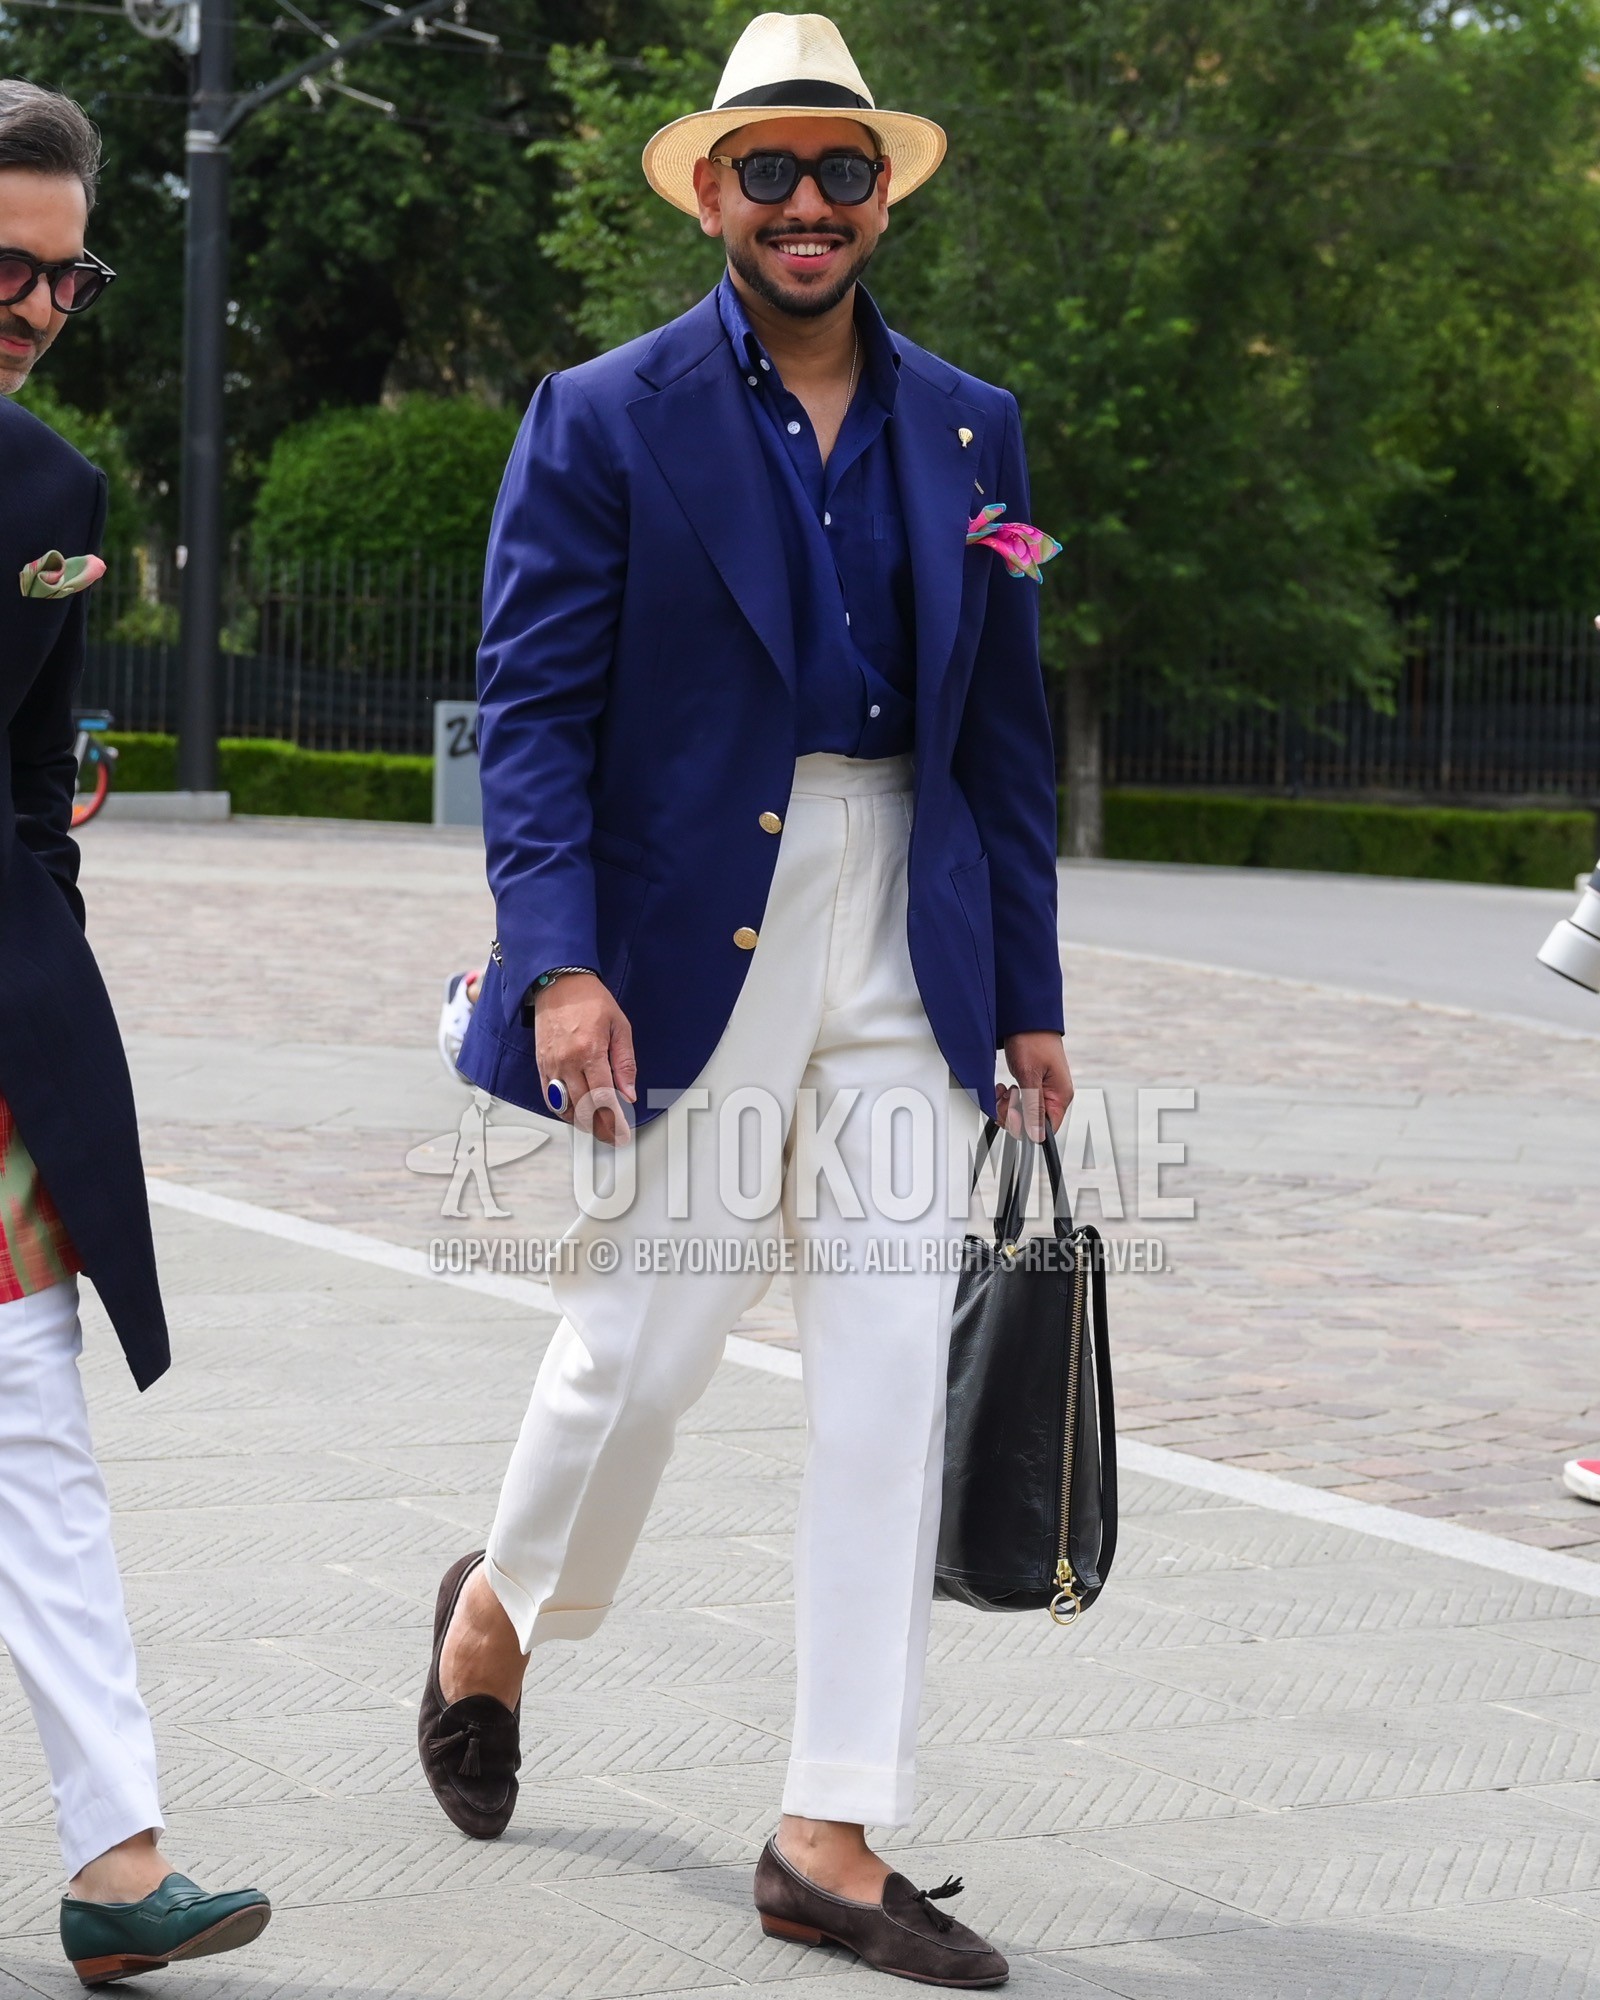 Men's spring summer autumn outfit with white plain hat, blue plain sunglasses, navy plain tailored jacket, navy plain shirt, white plain slacks, brown tassel loafers leather shoes, brown suede shoes leather shoes, black plain briefcase/handbag.